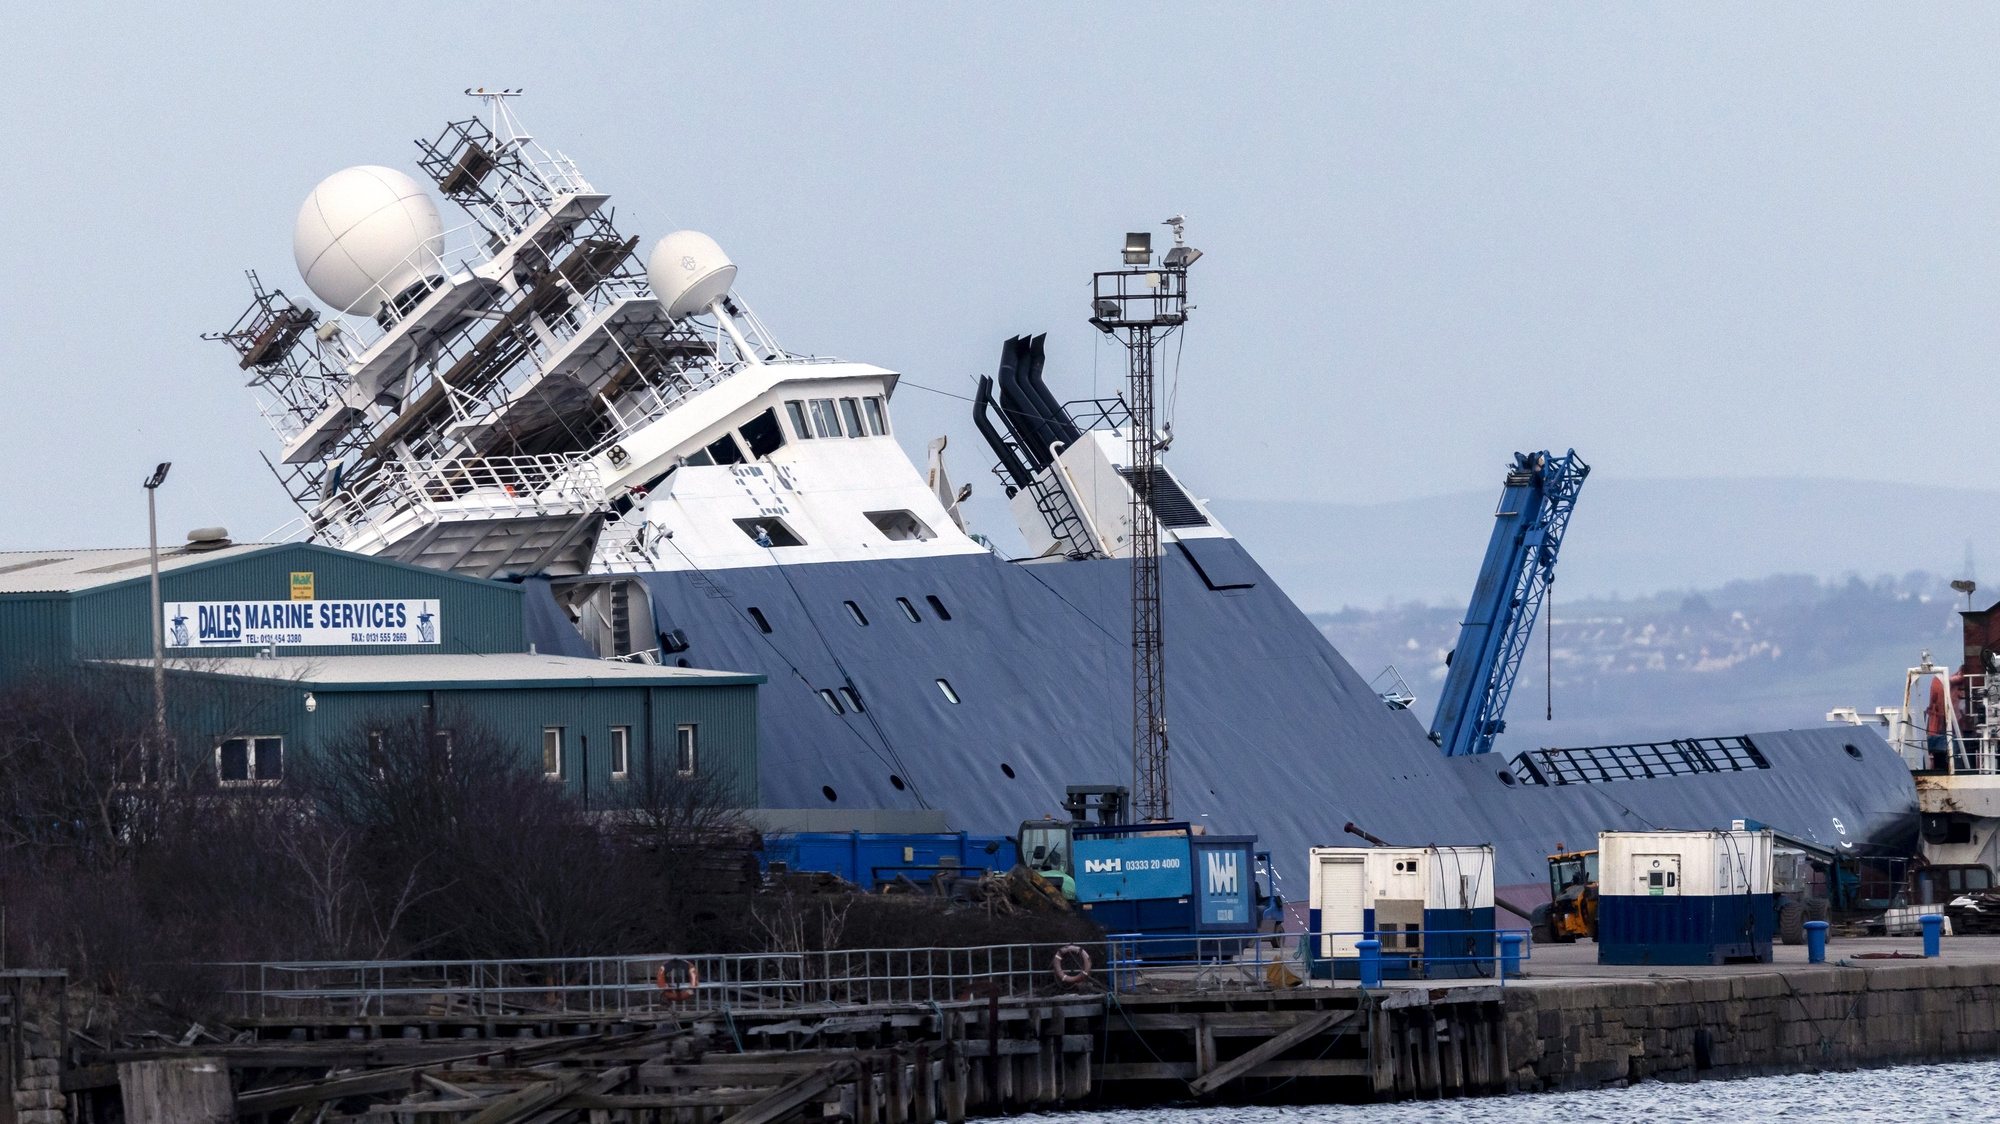 epa10537336 The RV Petrel ship toppled to the side at Imperial Dock in Leith, Edinburgh, Scotland, Britain, 22 March 2023. RV Petrel, a research vessel which was previously owned by the estate of late Microsoft co-founder Paul Allen, dislodged in its dry dock leaving 33 people injured, according to Scottish Ambulance Service.  EPA/ROBERT PERRY